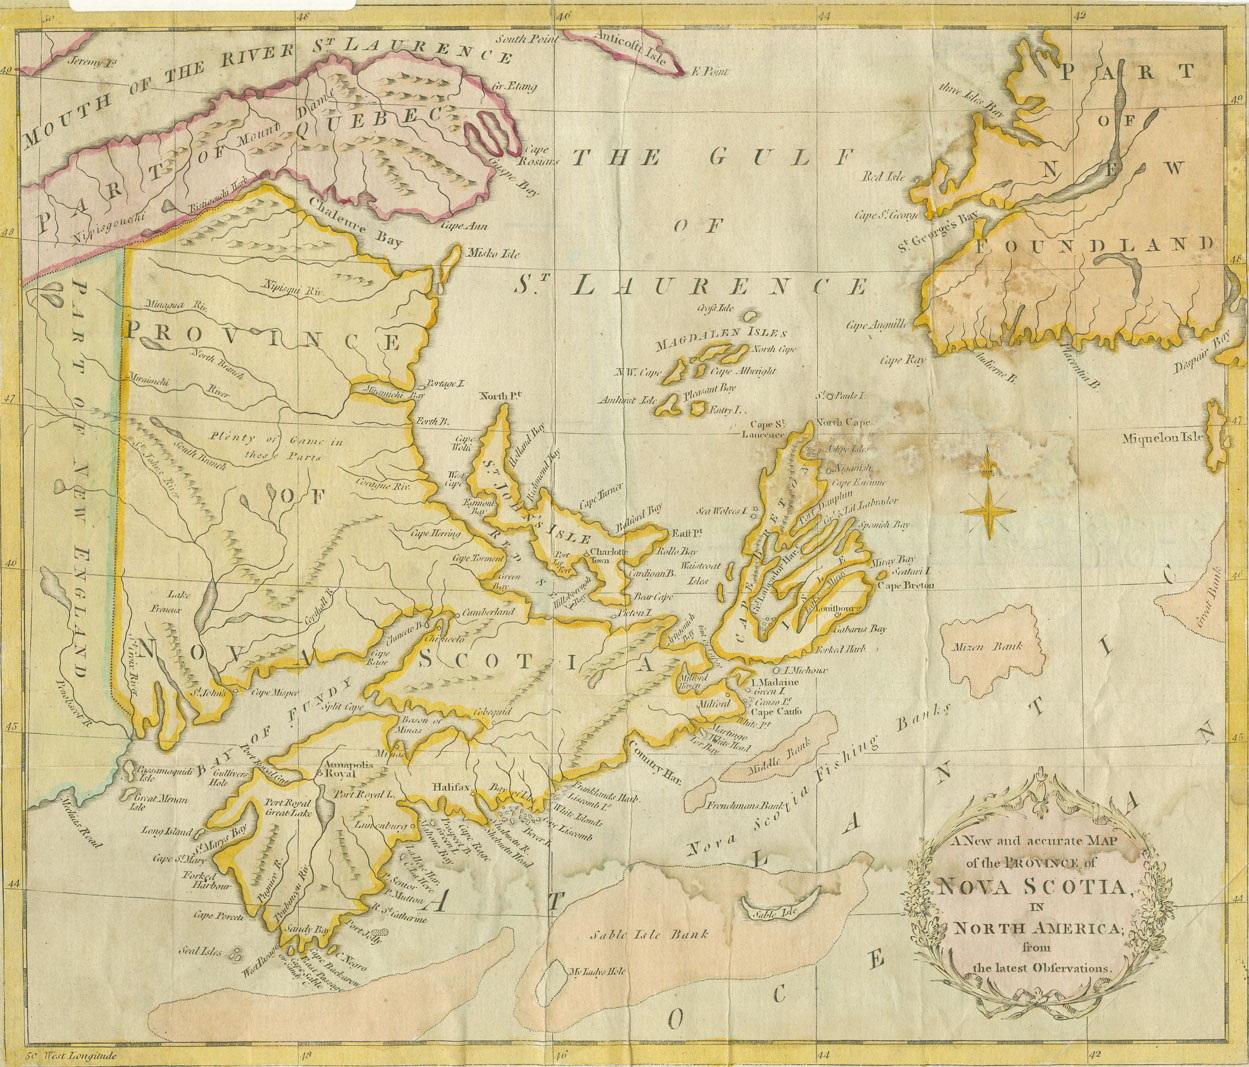 easson : A New and accurate Map of the Province of Nova Scotia in North America from the latest Observations